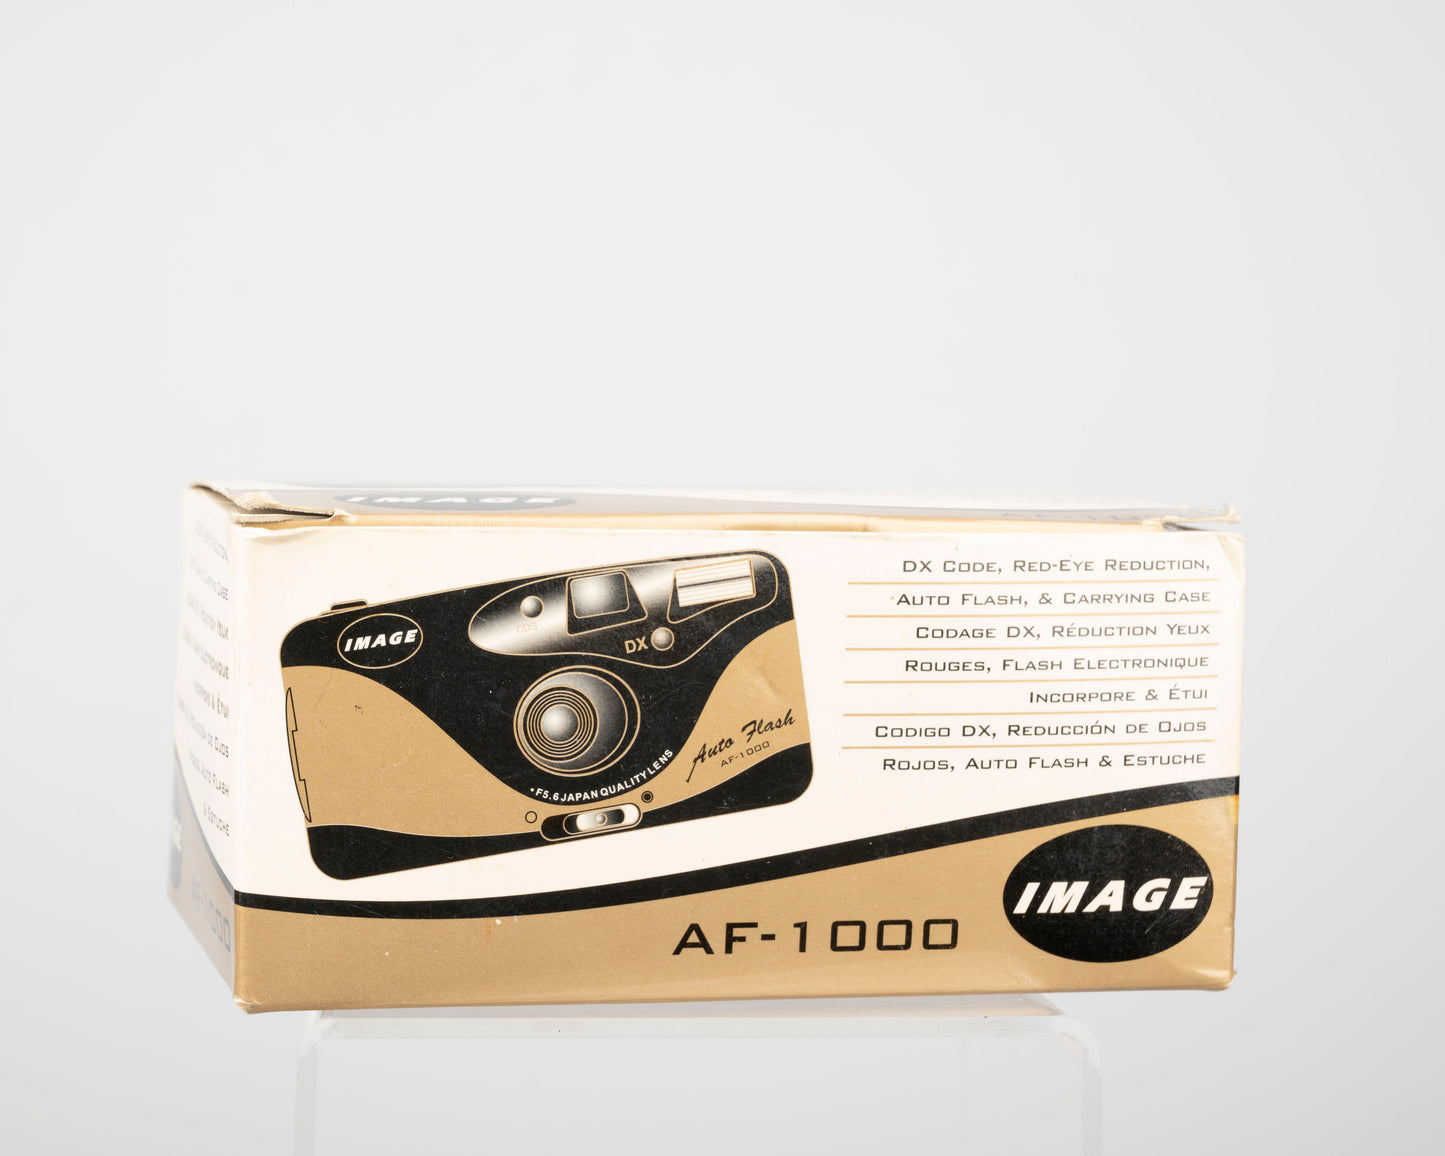 Image AF-1000 35mm camera (new old stock w/ box, case and manual)